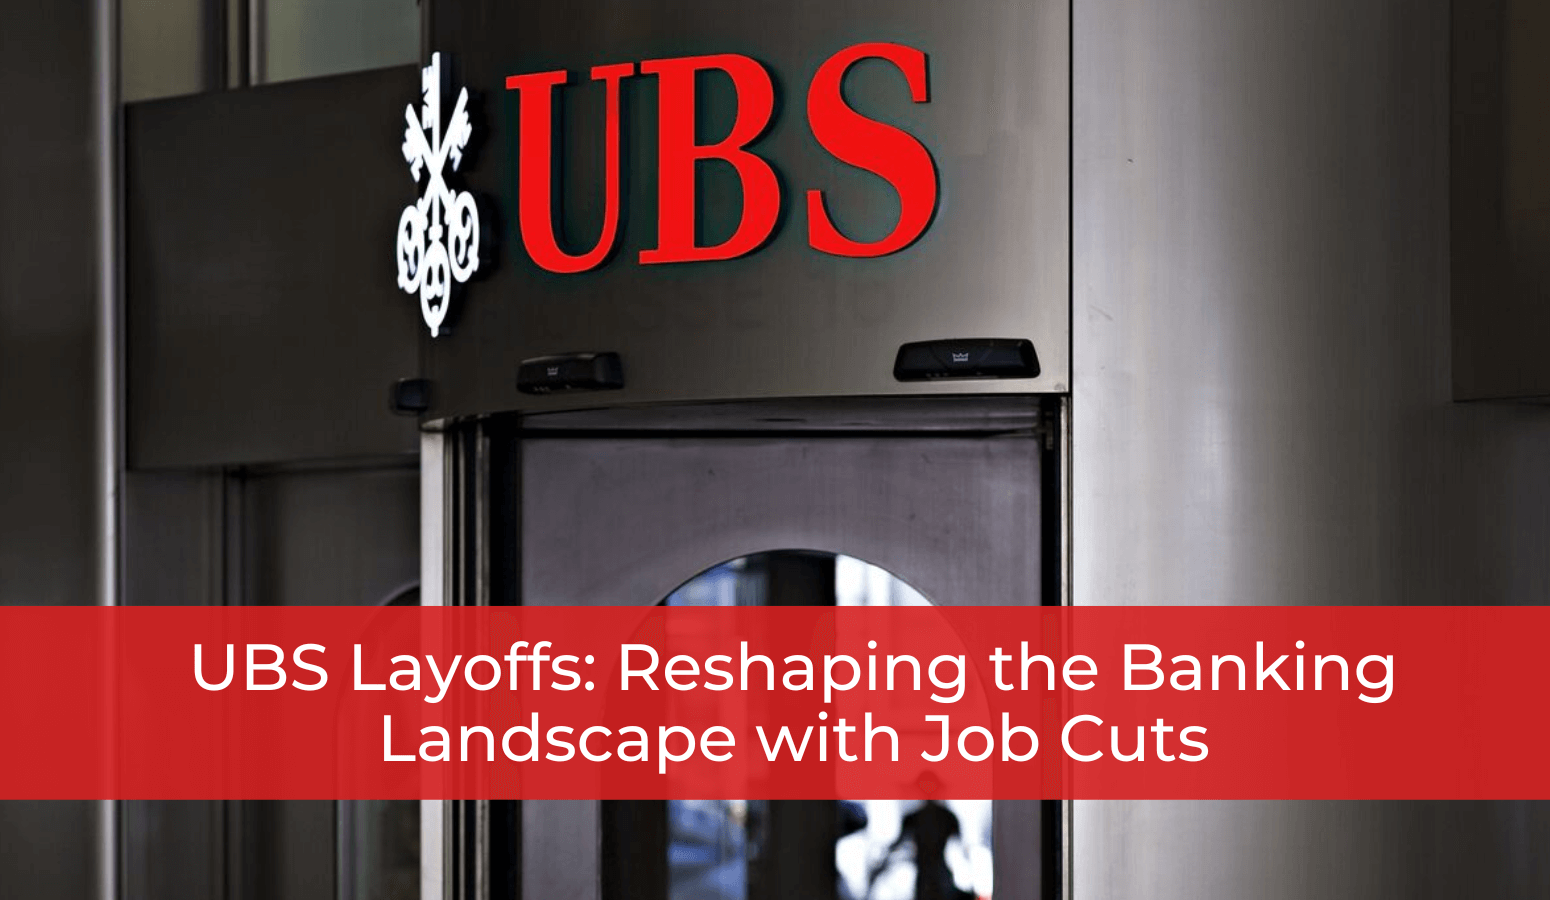 Featured image for “UBS Layoffs: Reshaping the Banking Landscape with Job Cuts”